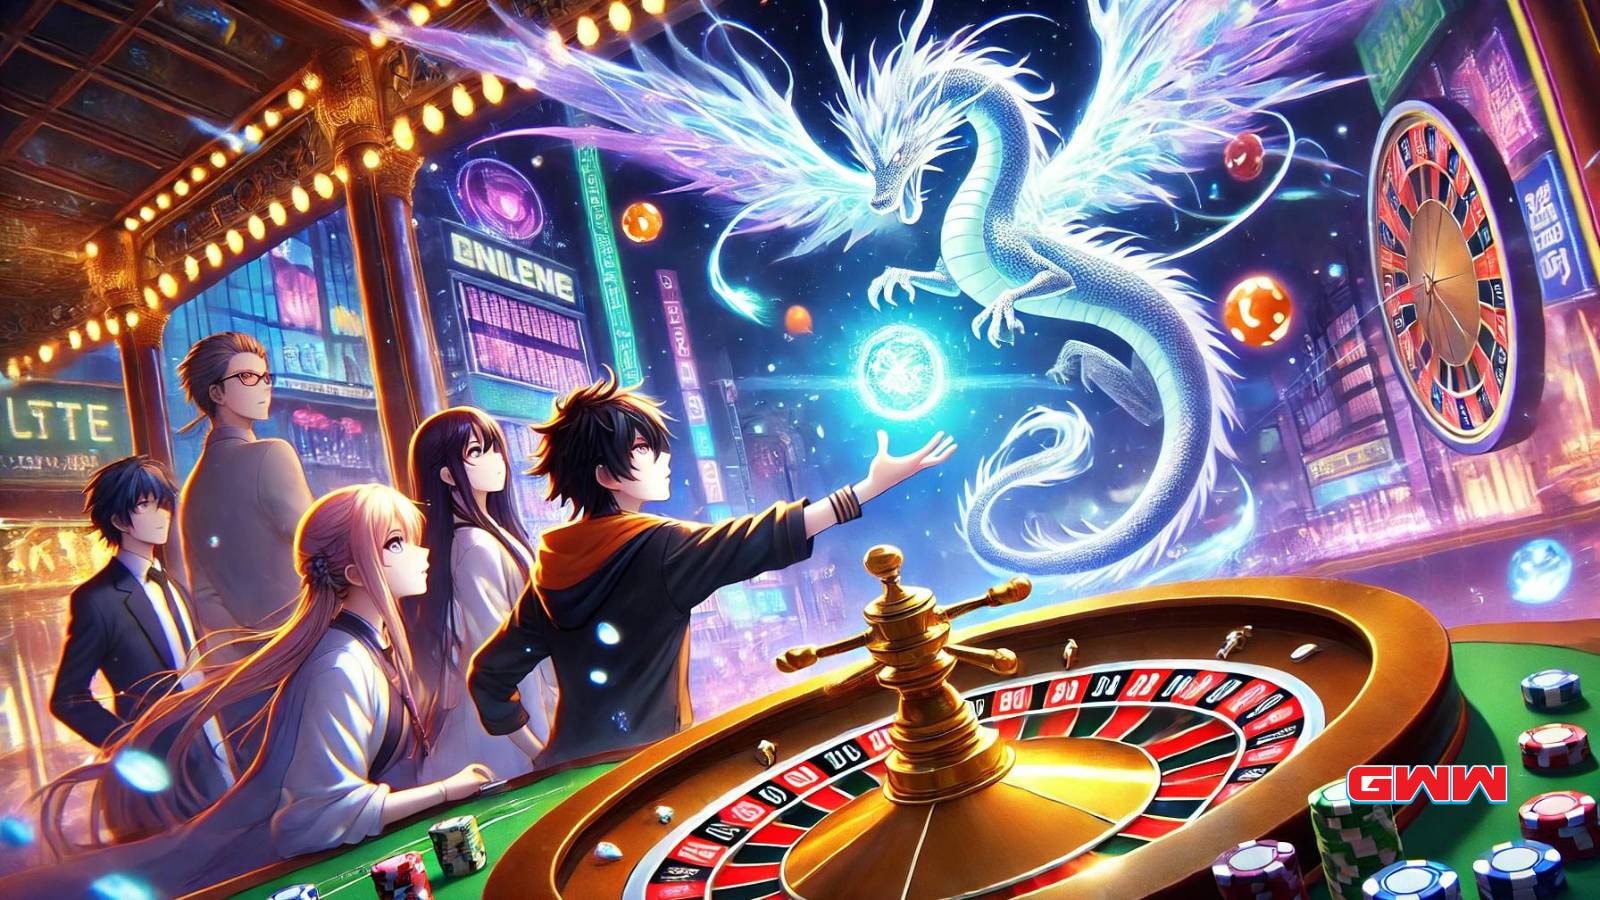 A captivating anime scene depicting characters trying to obtain a mystical dragon and a magical ball in an anime roulette game.